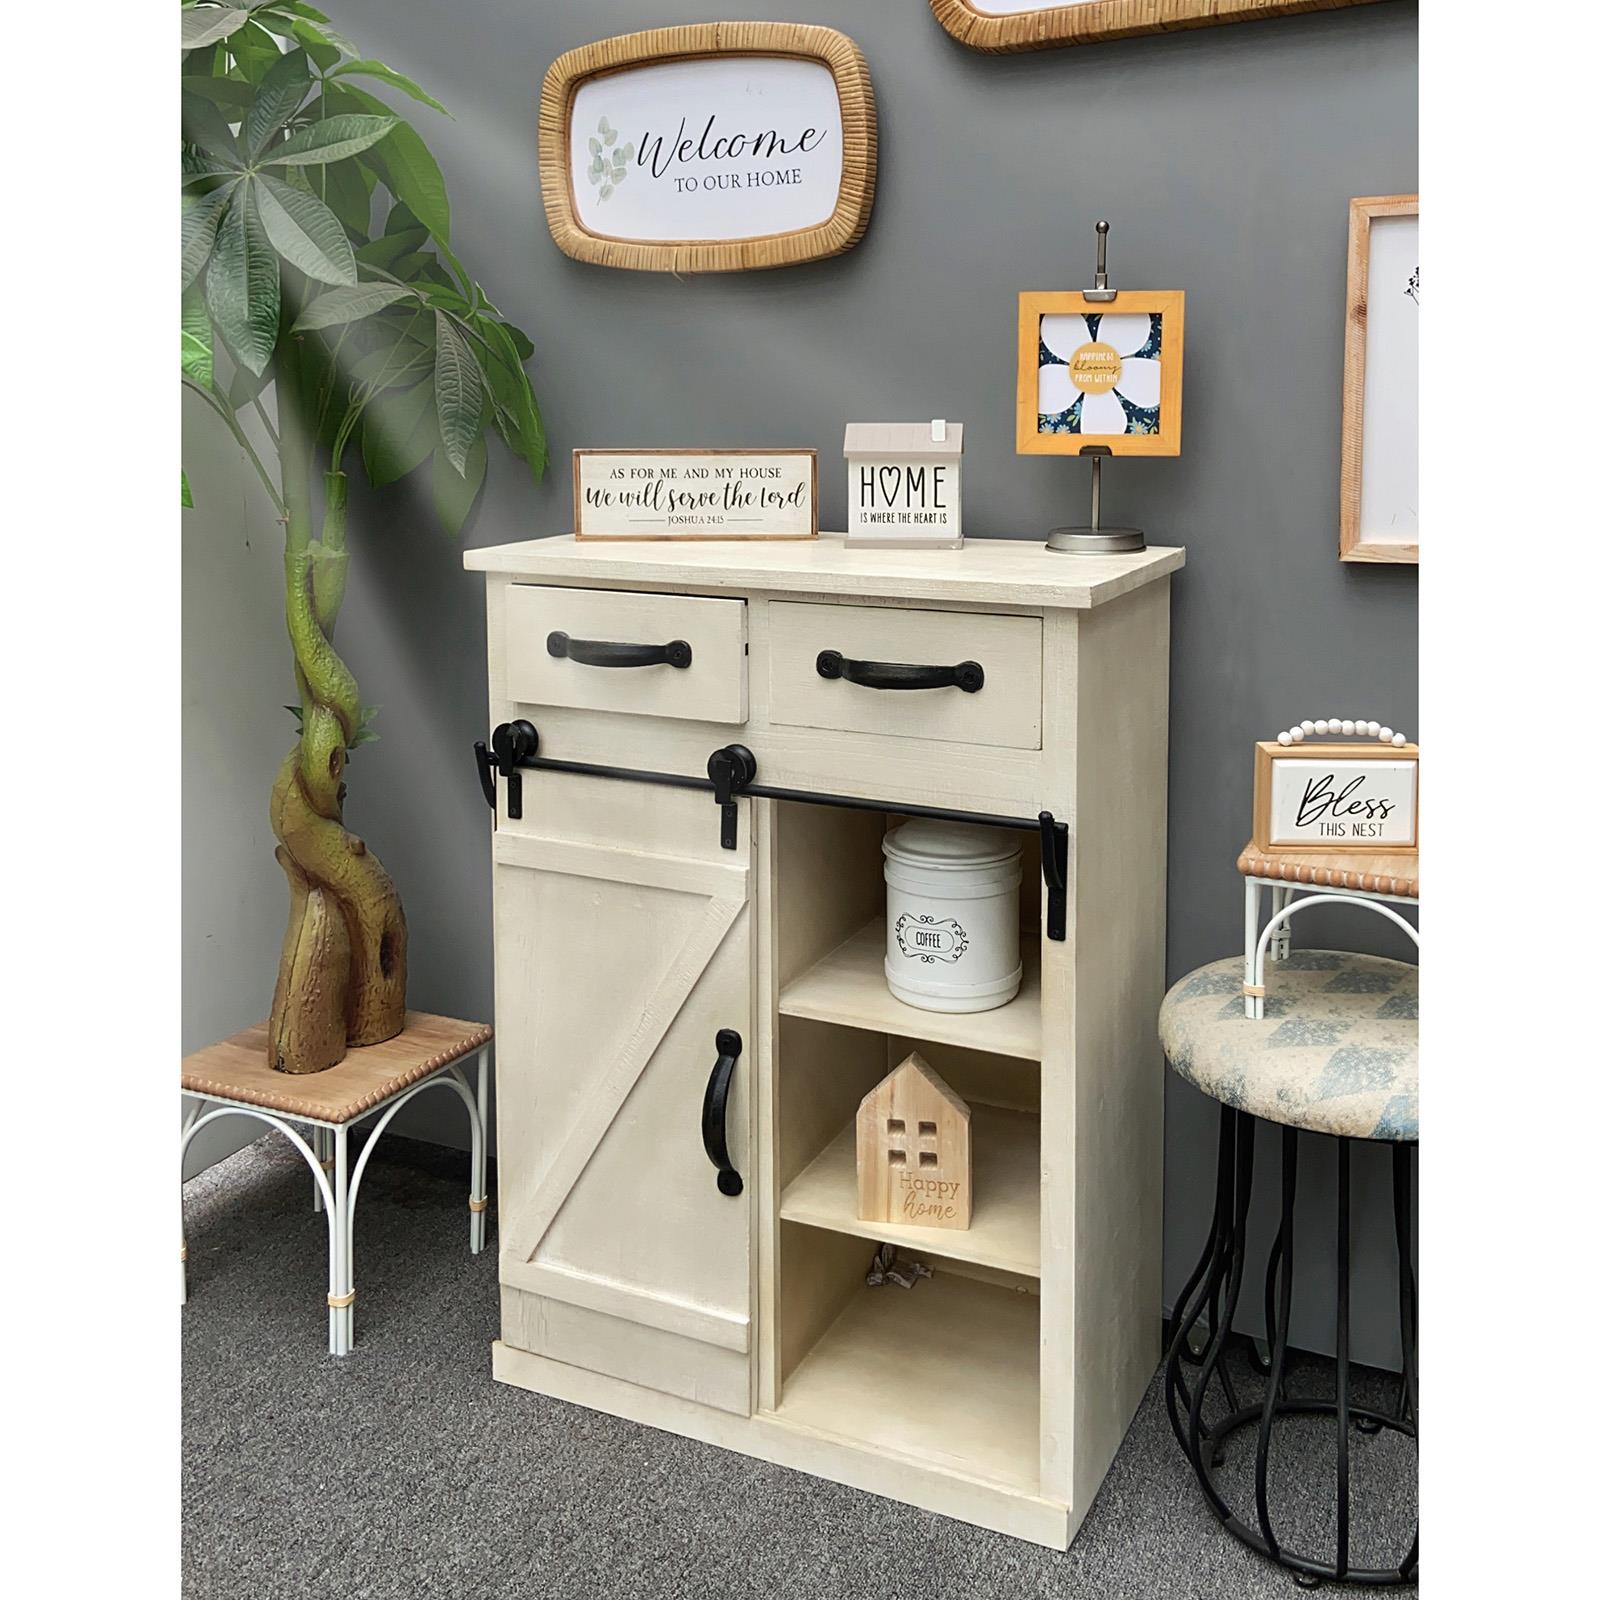 Zimtown Wood Accent Chest Sideboard Cabinet Entryway Table Retro Style with Farmhouse Single Barn Door, 2 Drawers White - image 1 of 10